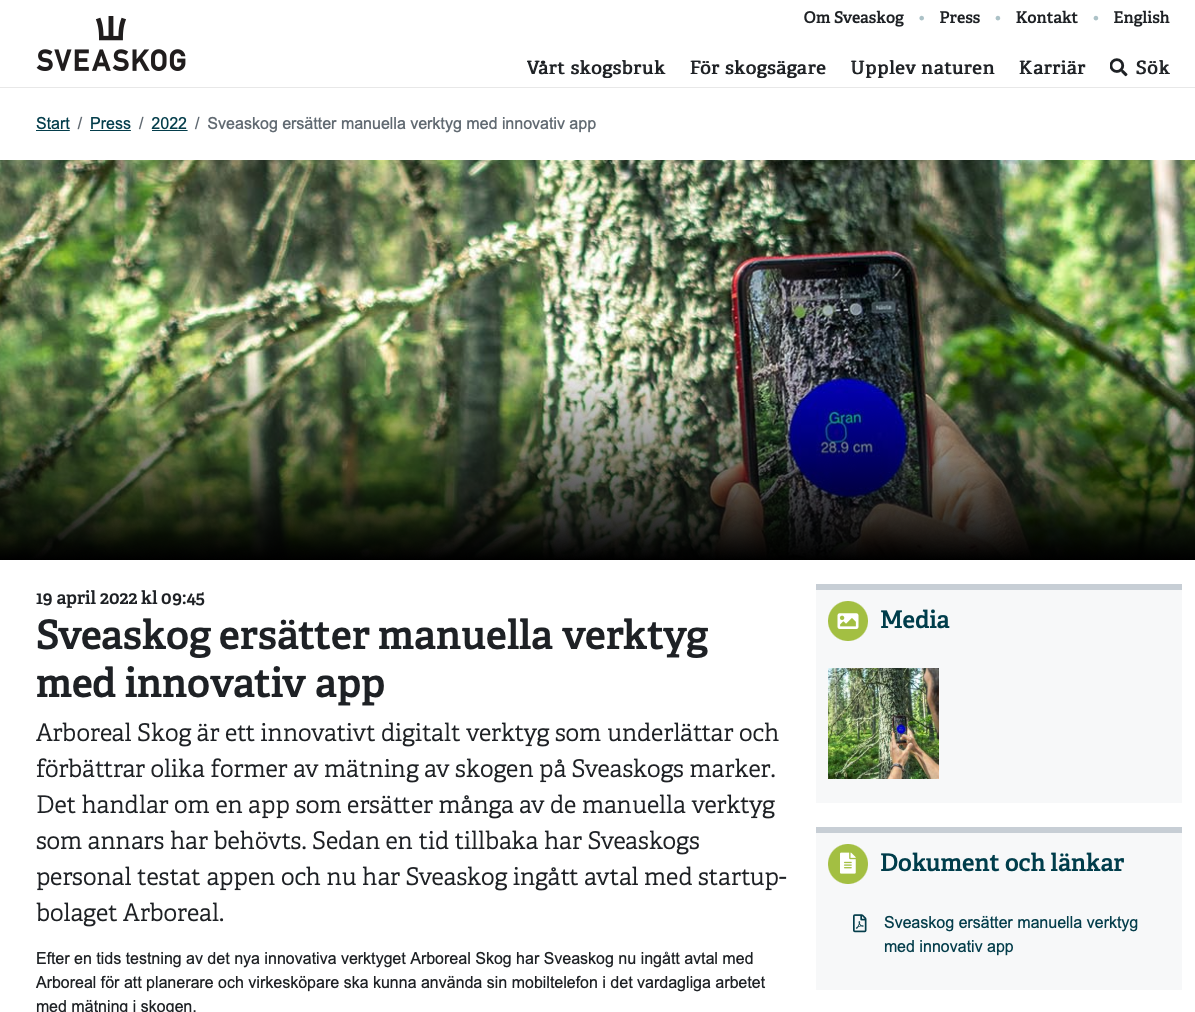 Sveaskog replaces their manual tools with our app Arboreal Forest.